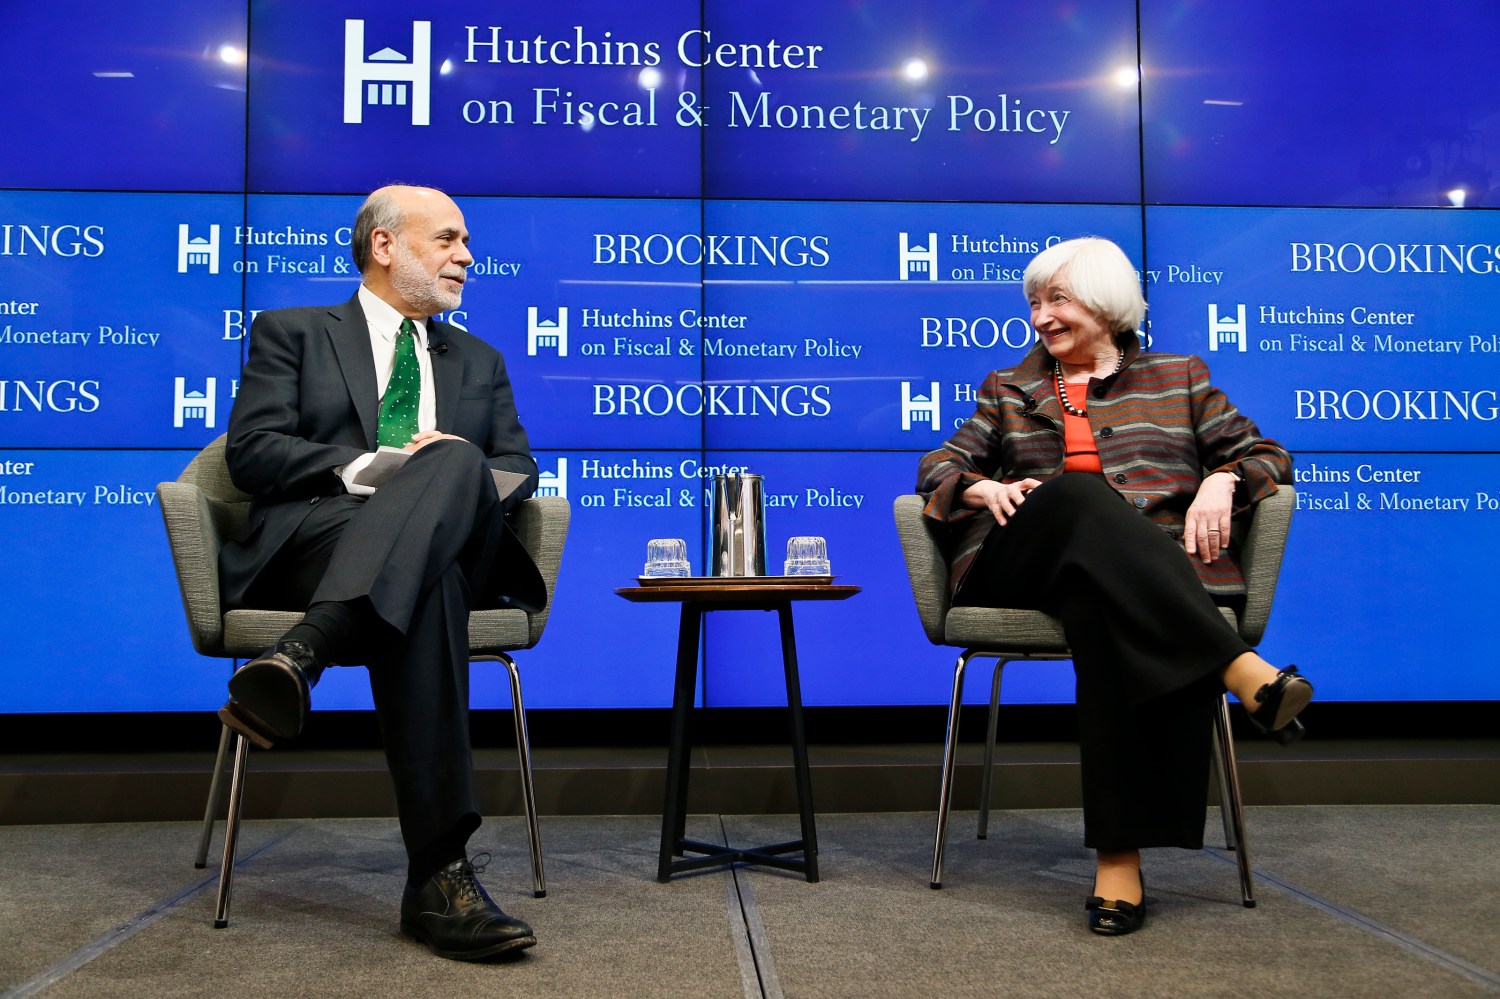 Janet Yellen discusses her career and the future of the U.S. economy with Ben Bernanke.